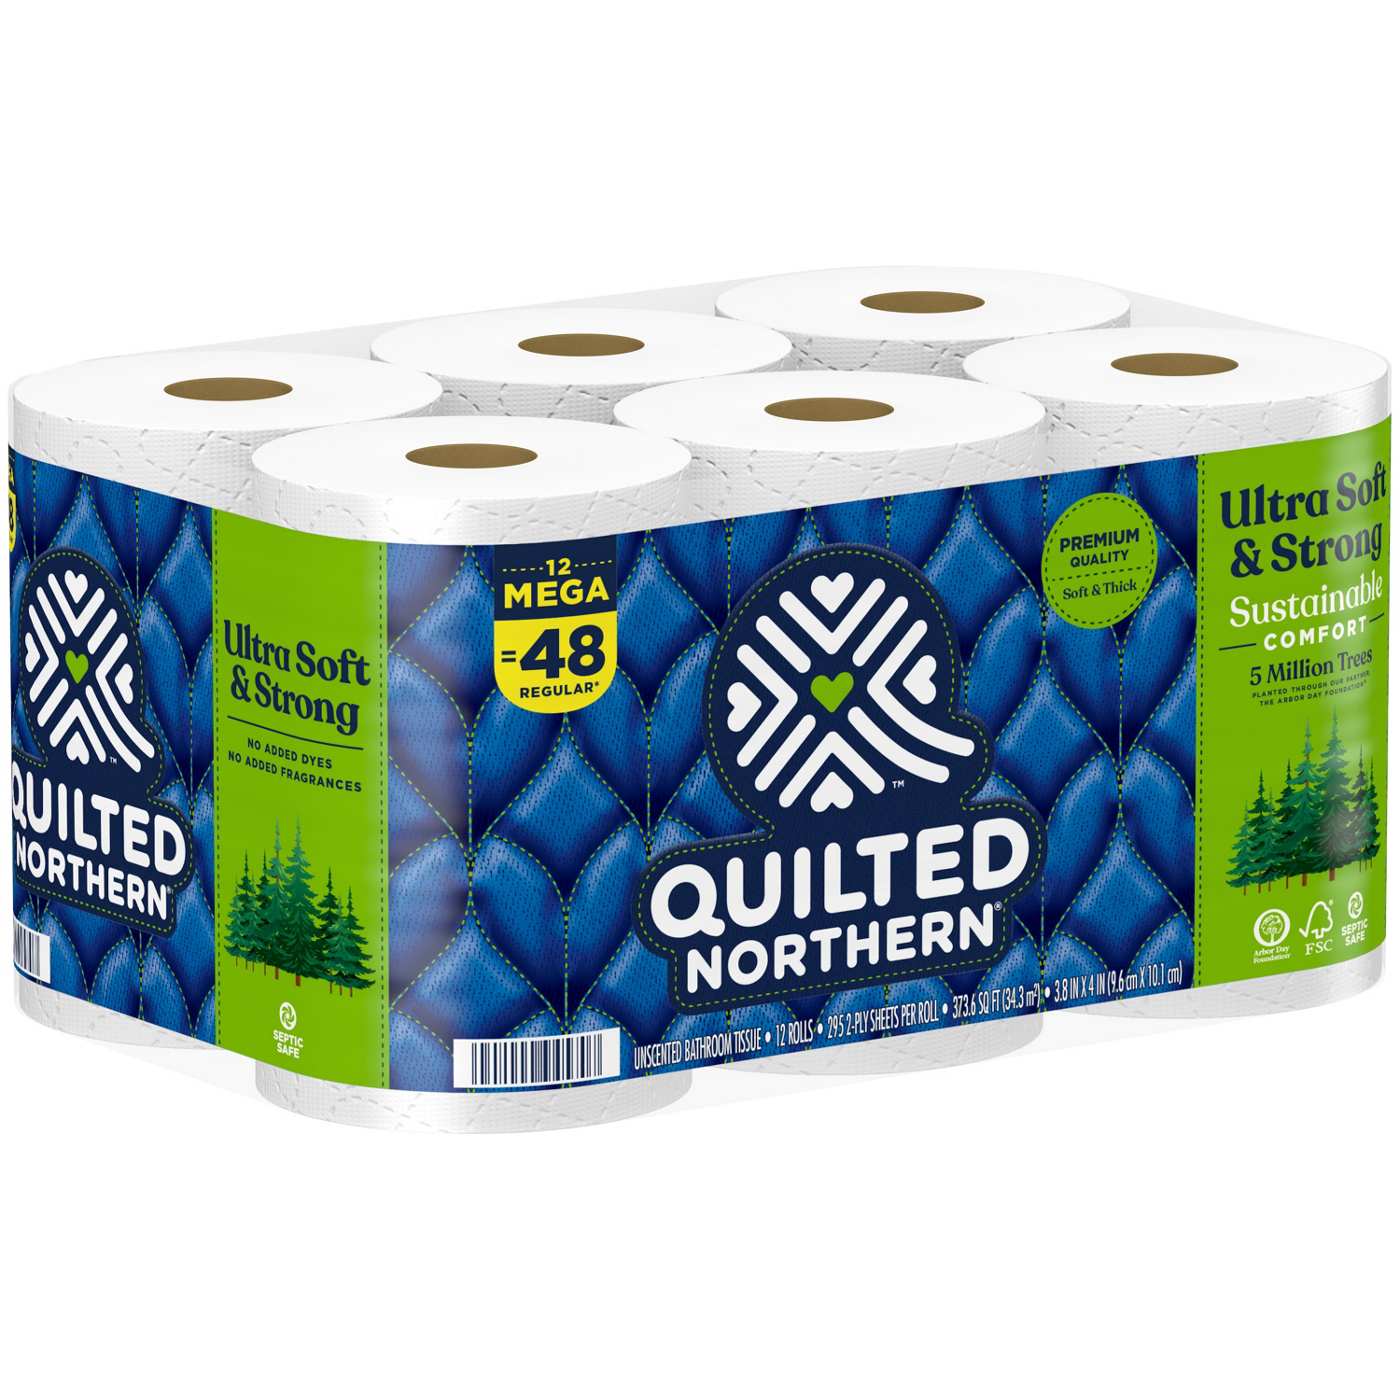 Quilted Northern Ultra Soft & Strong Toilet Paper; image 2 of 3